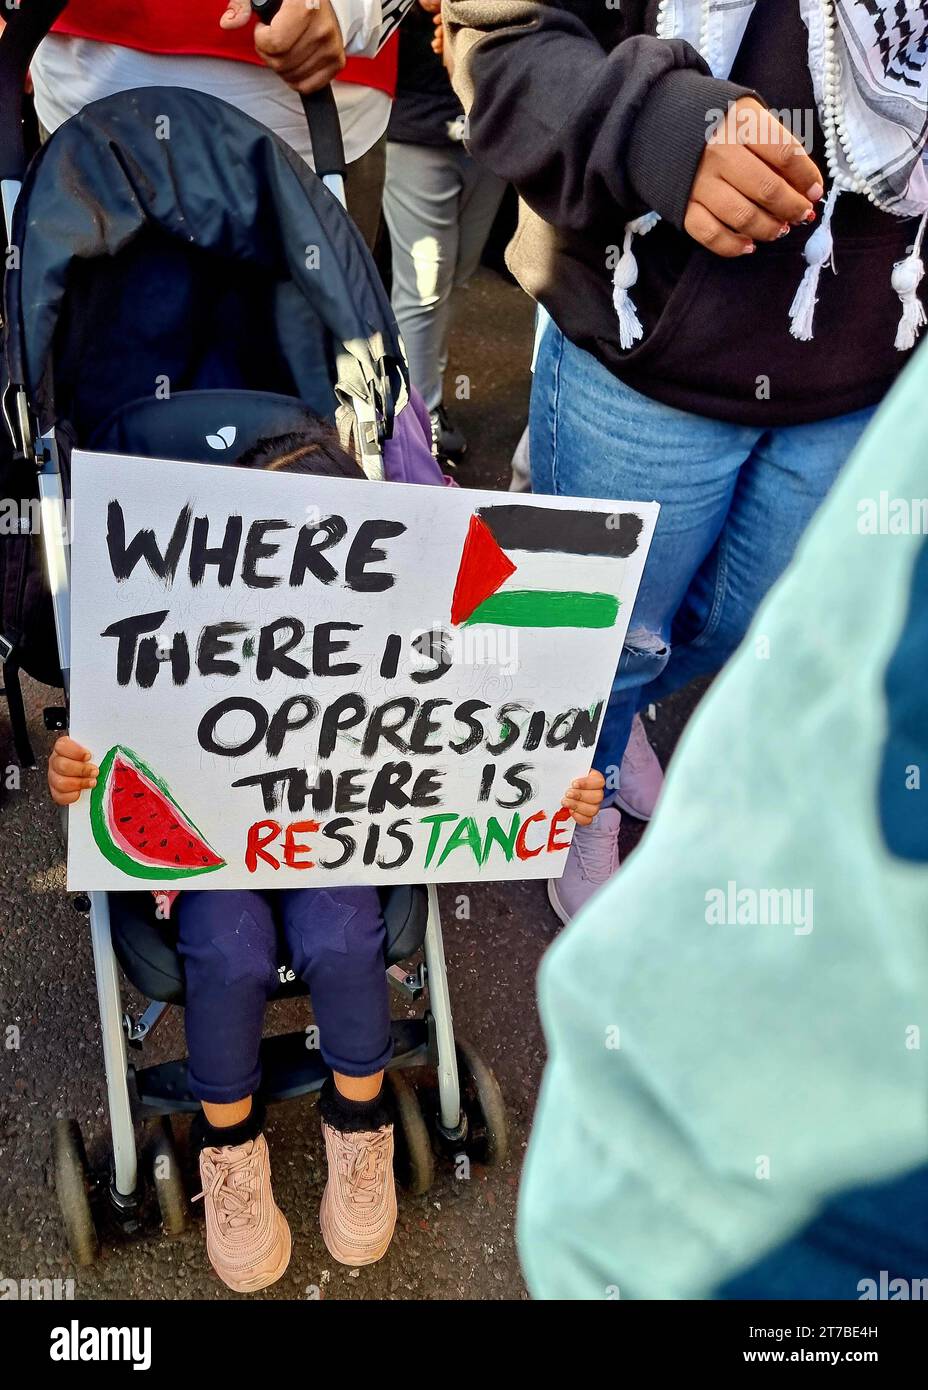 Over 300,000 Pro-Palestinians marched from Hyde Park to the USA embassy in London, on the afternoon of 11th November 2023, protesting against the war and urging an immediate ceasefire. United Kingdom. Stock Photo